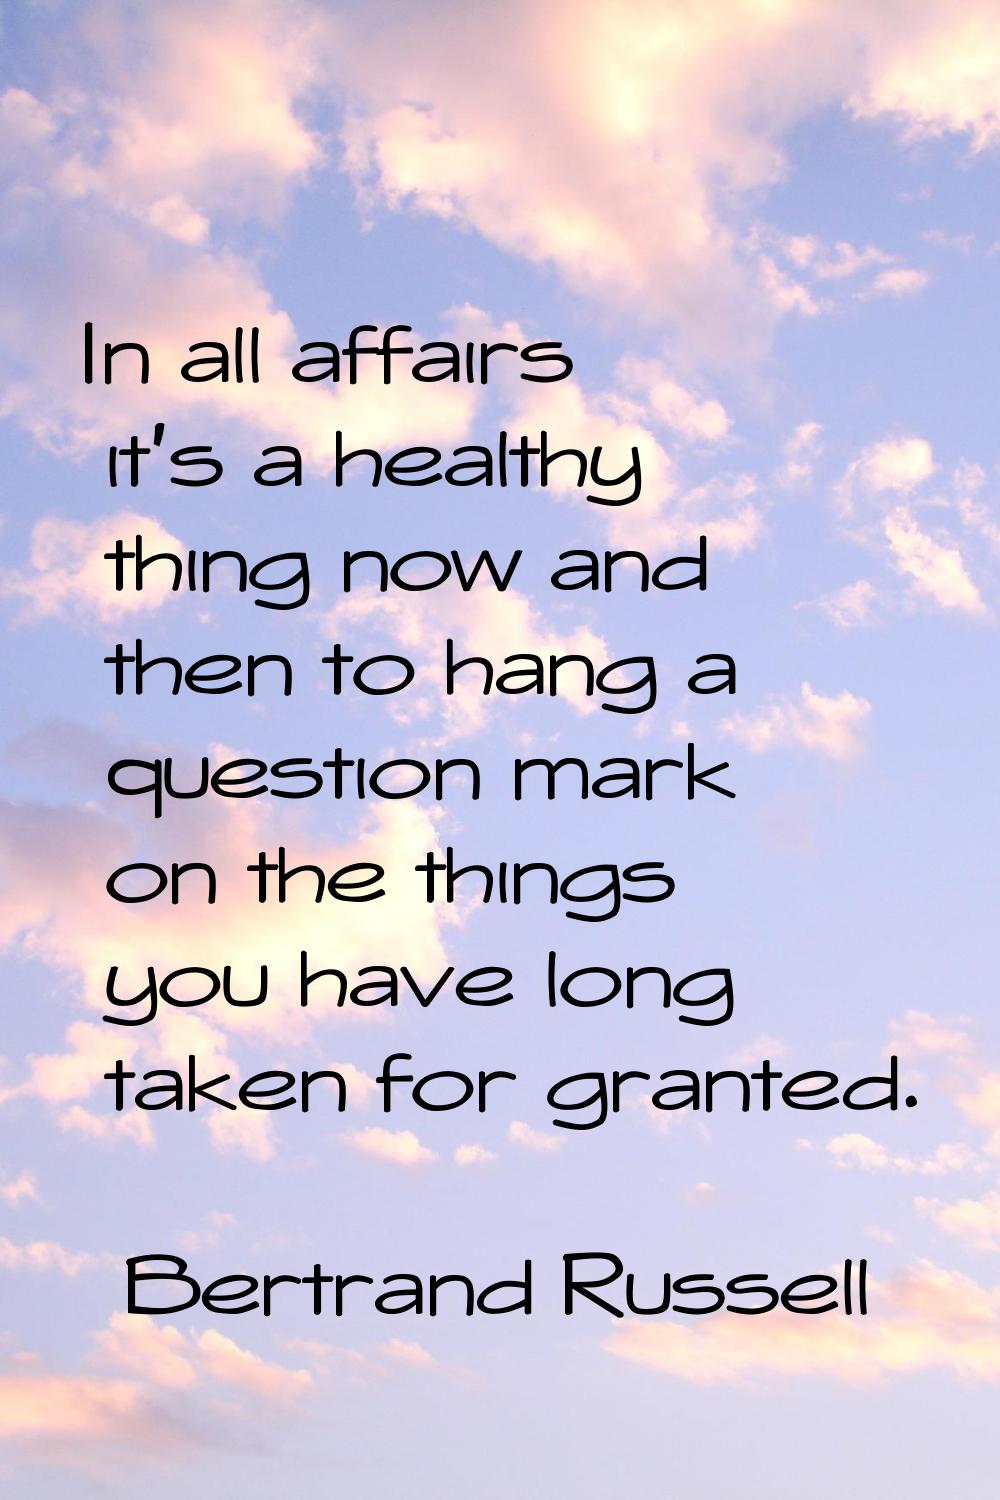 In all affairs it's a healthy thing now and then to hang a question mark on the things you have lon